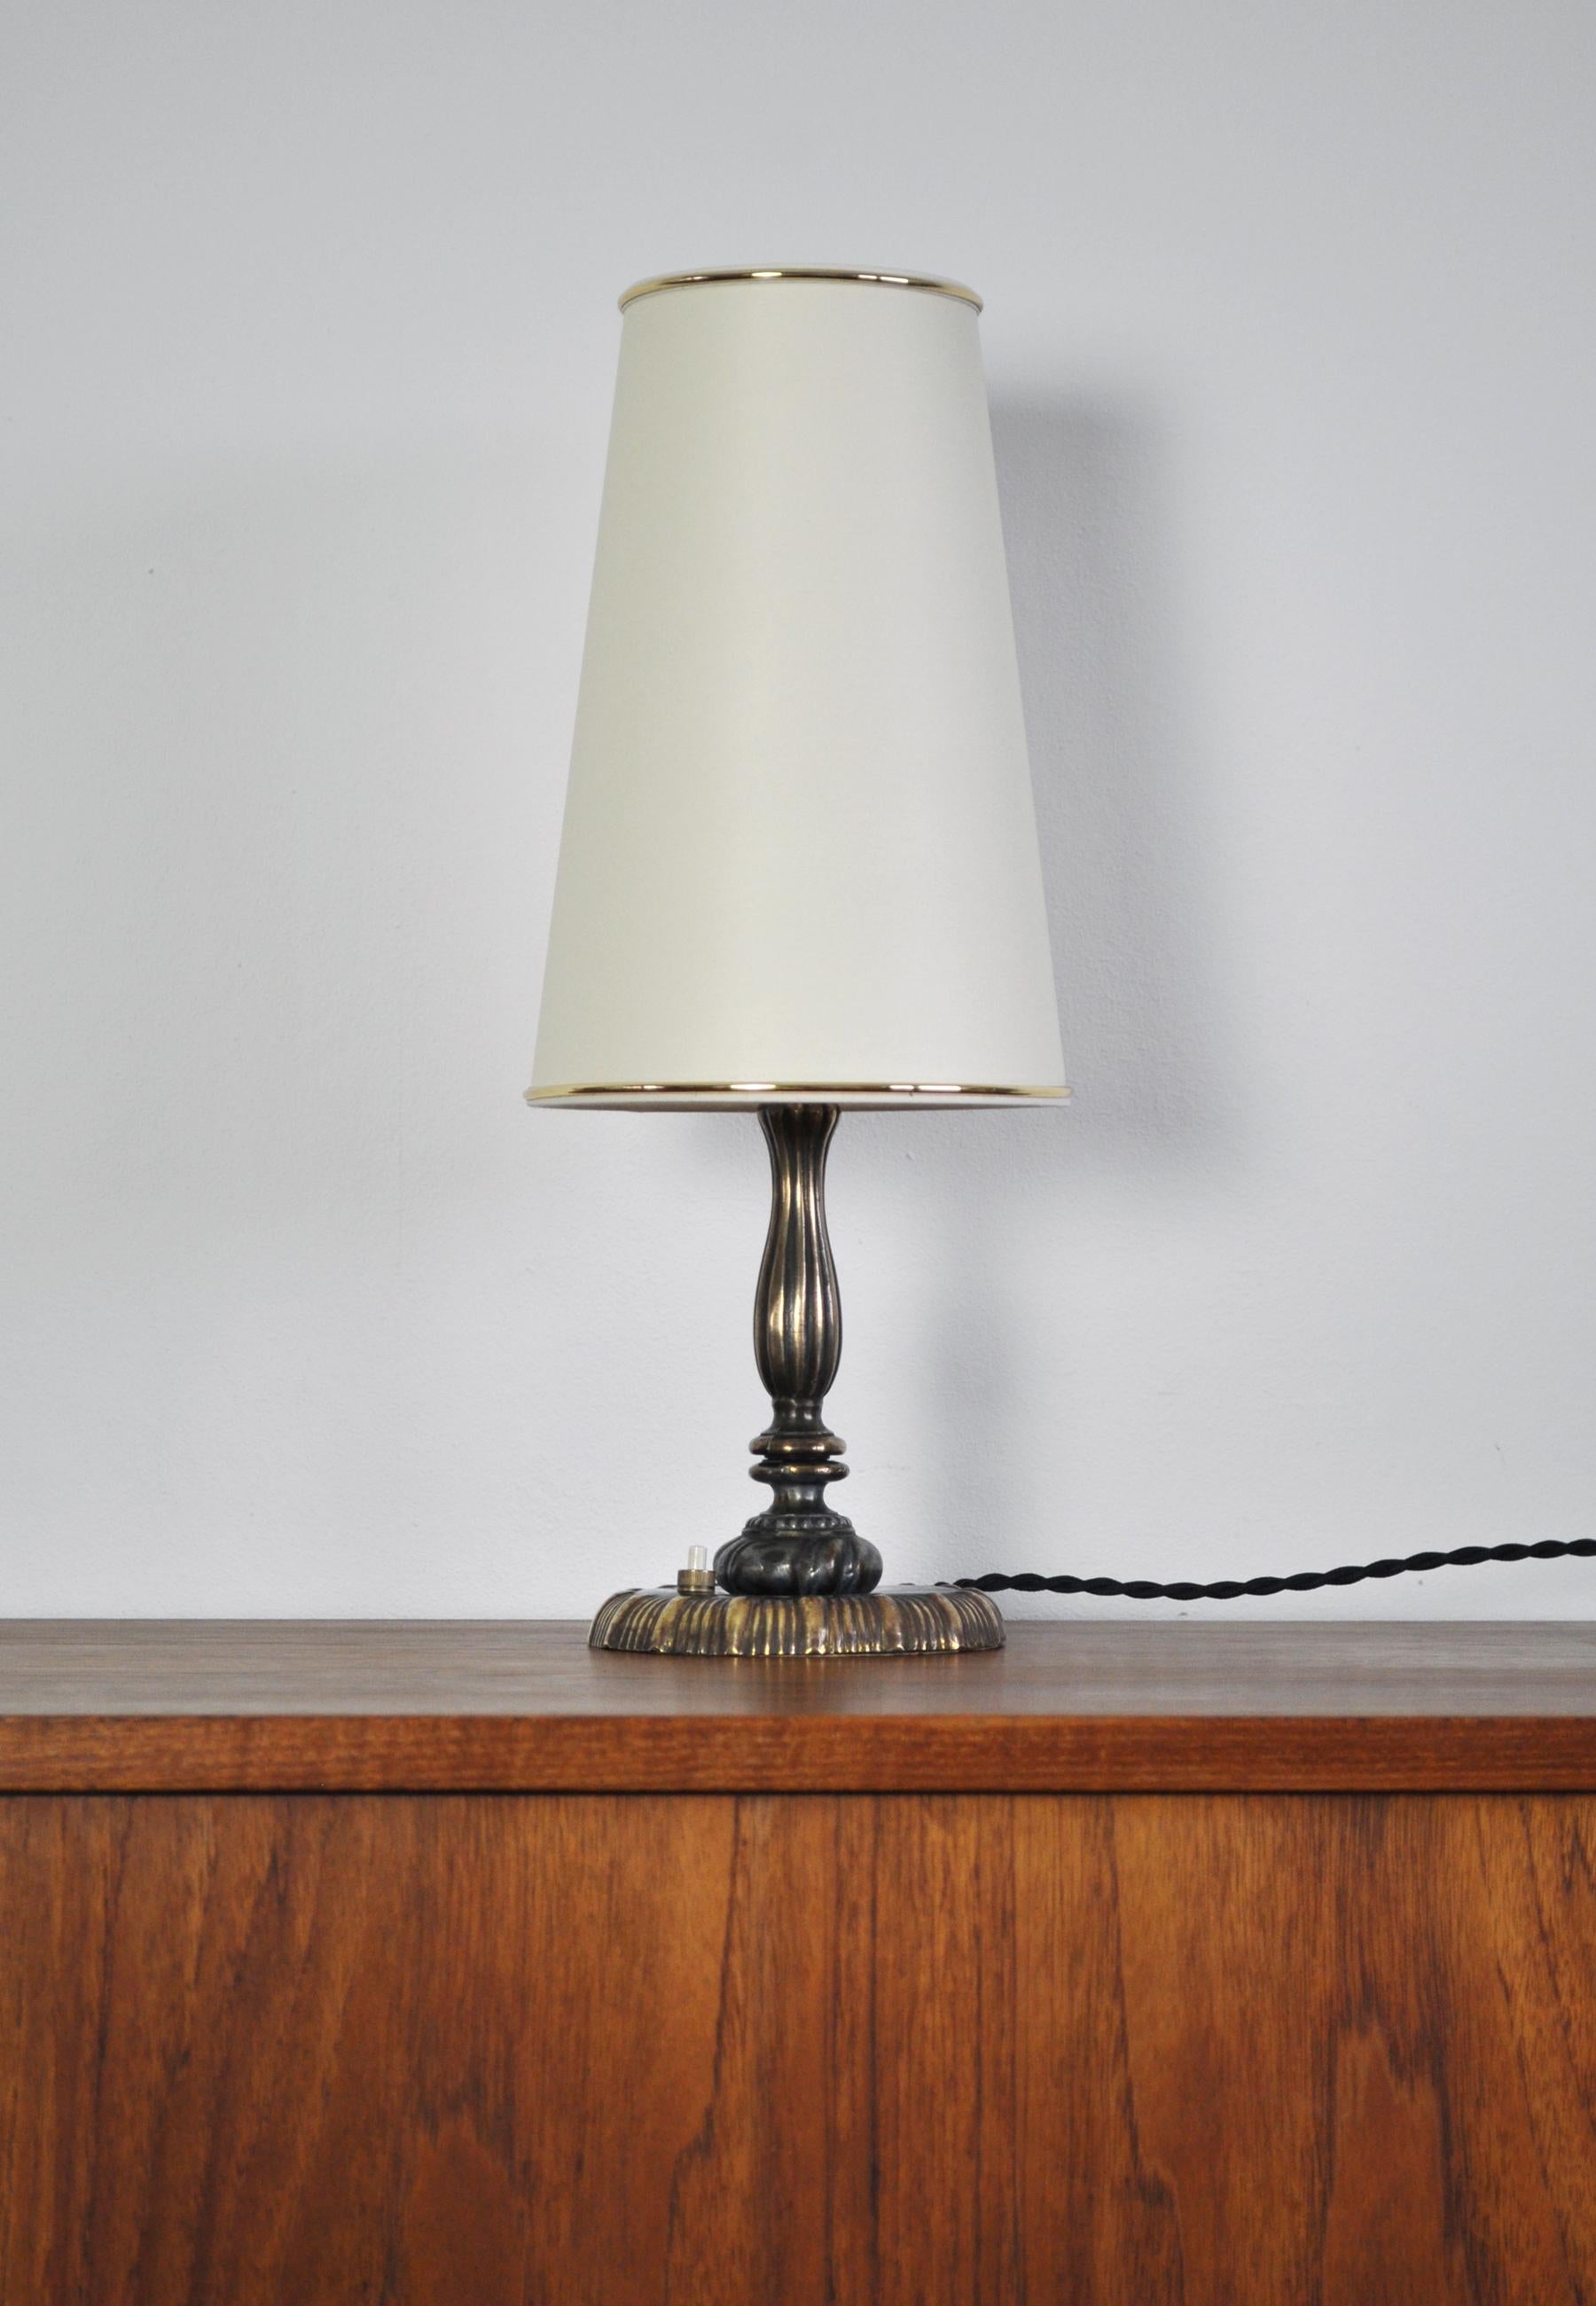 Art Nouveau table lamp early 20th century, probably Danish.
Fine vintage condition with a beautiful patination, signs of wear consistent with age and use. 
New shade and rewired.

Light source: E27 Edison screw fitting.
Height with shade 43 cm,